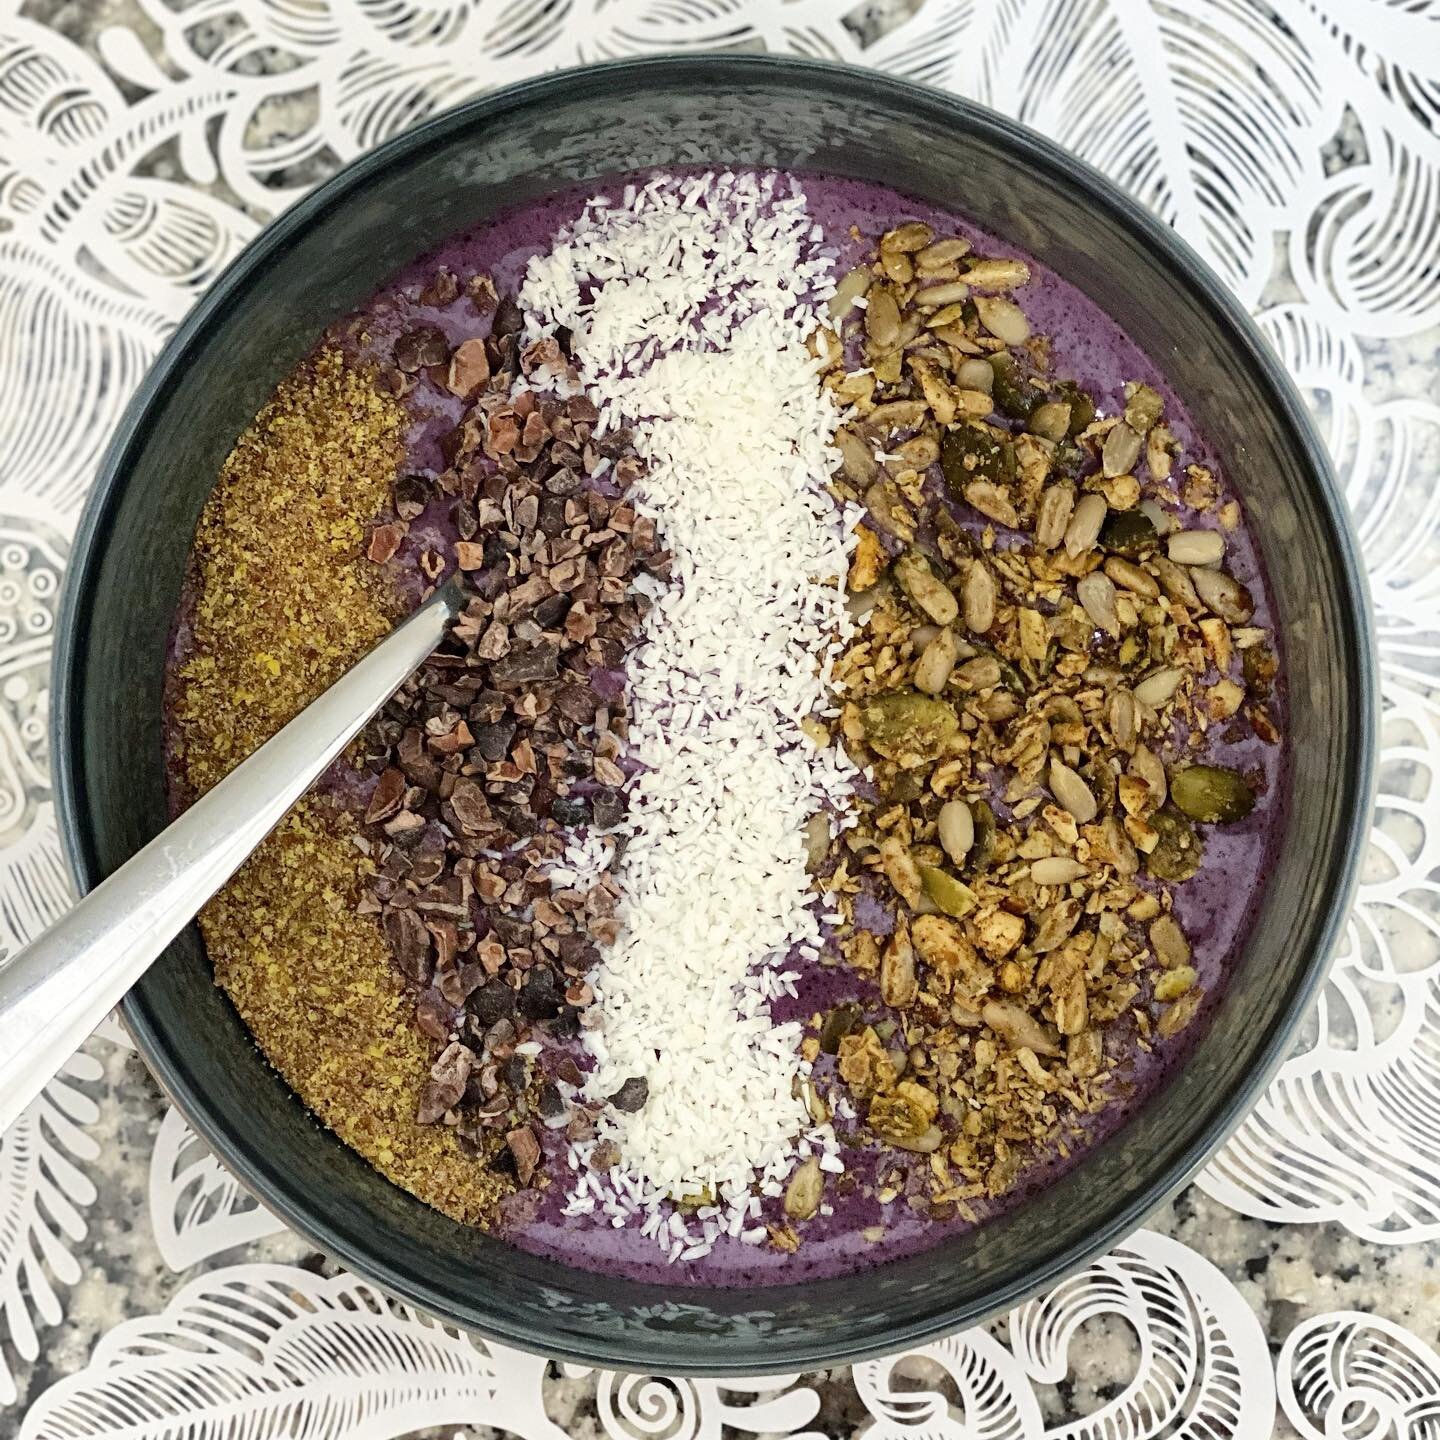 I know its pumpkin spice latte season.. but açaí bowls are not a seasonal thing 😏
Please try this easy recipe, and make it a post workout or breakfast habit! 
I use the nutribullet (fav thing) but you can use a juicer:
-1/2 banana, frozen (slice i